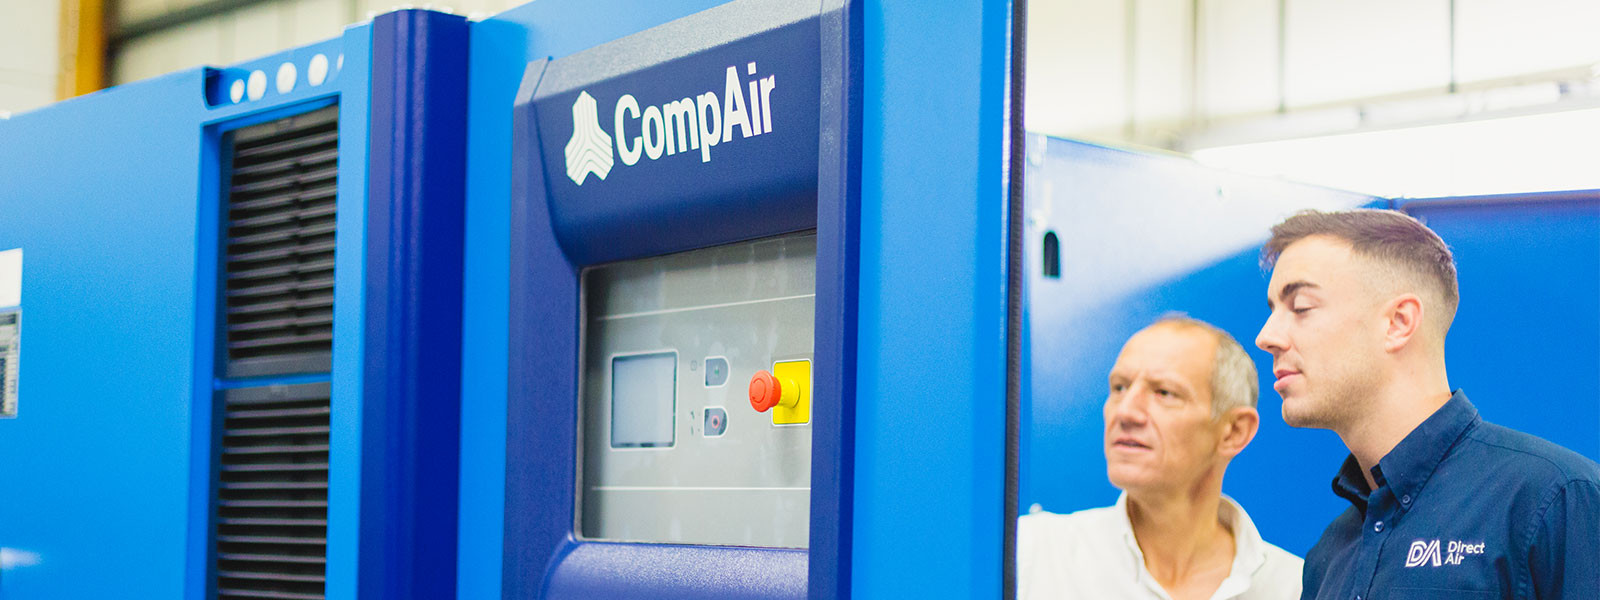 5 tips to lower compressed air costs